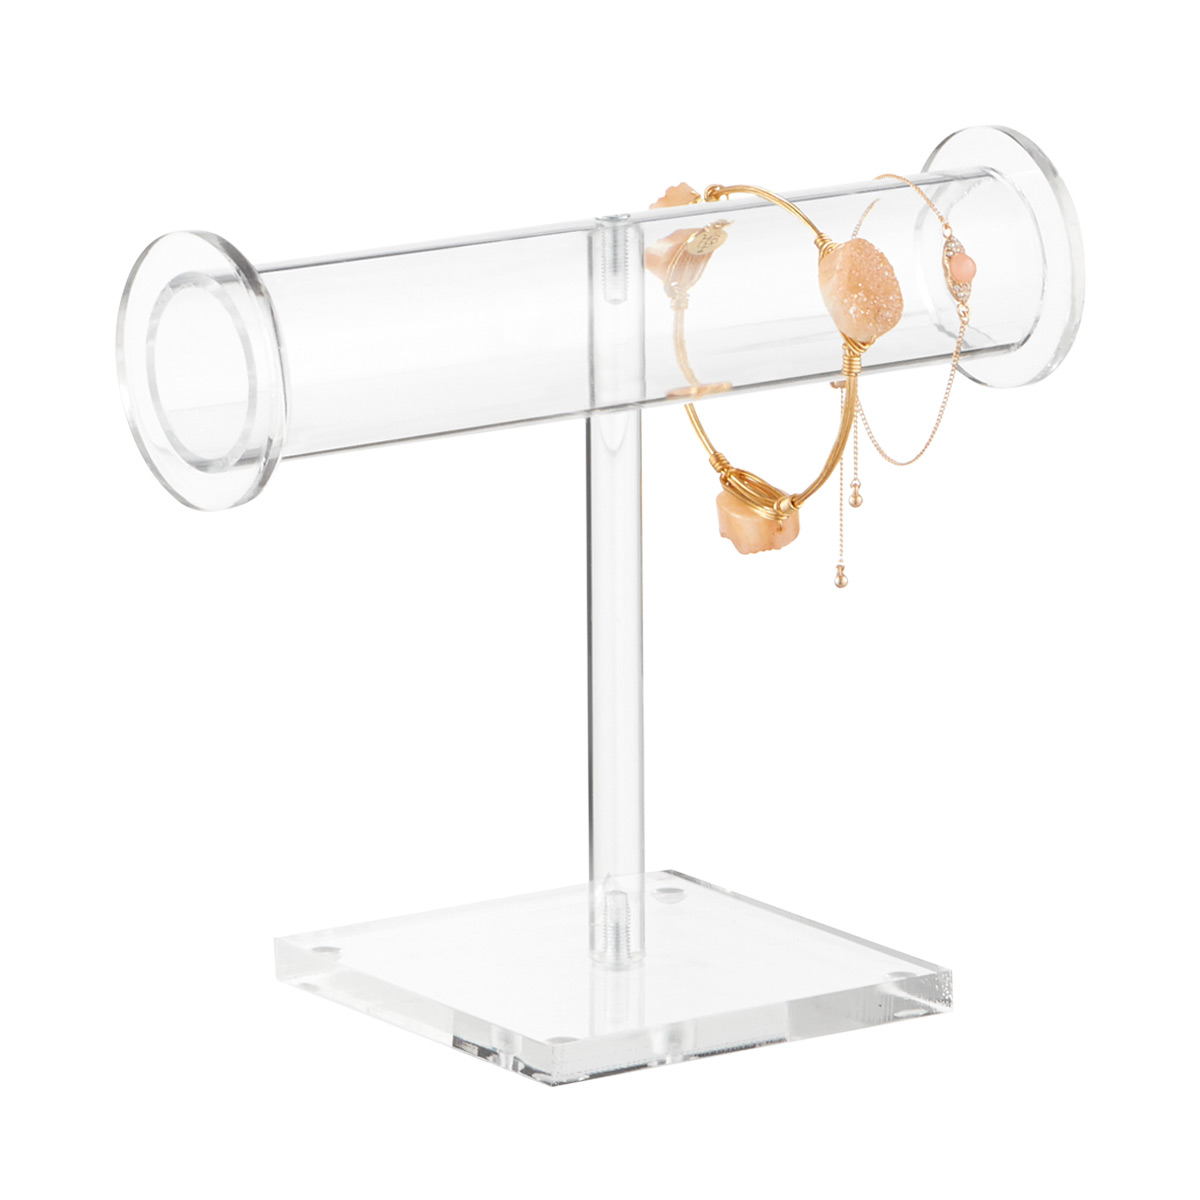 Acrylic Jewelry Stand | The Container Store